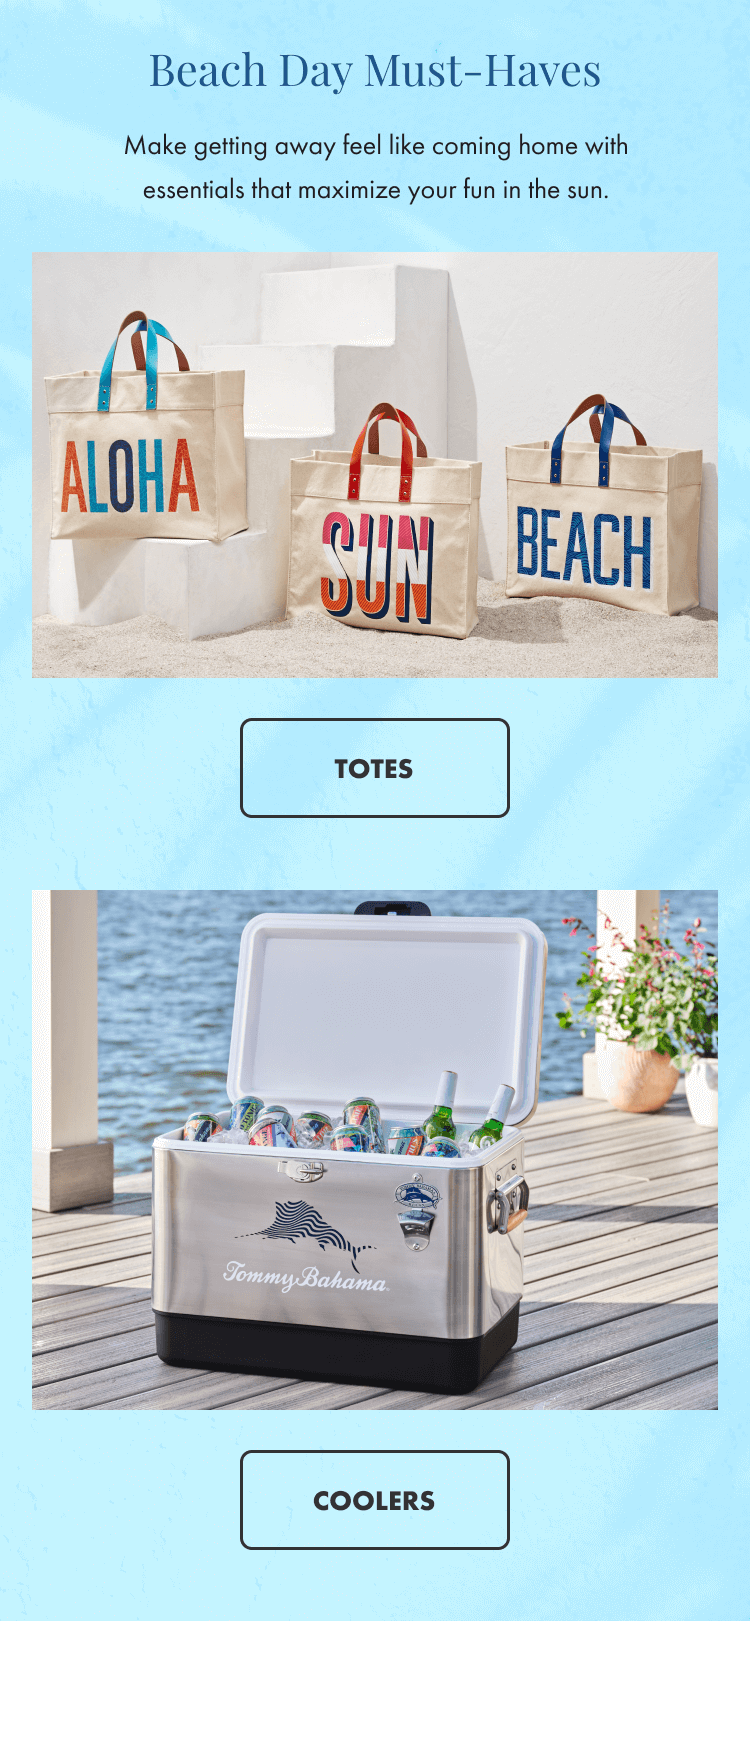 Beach Day Must-Haves - Totes & Coolers